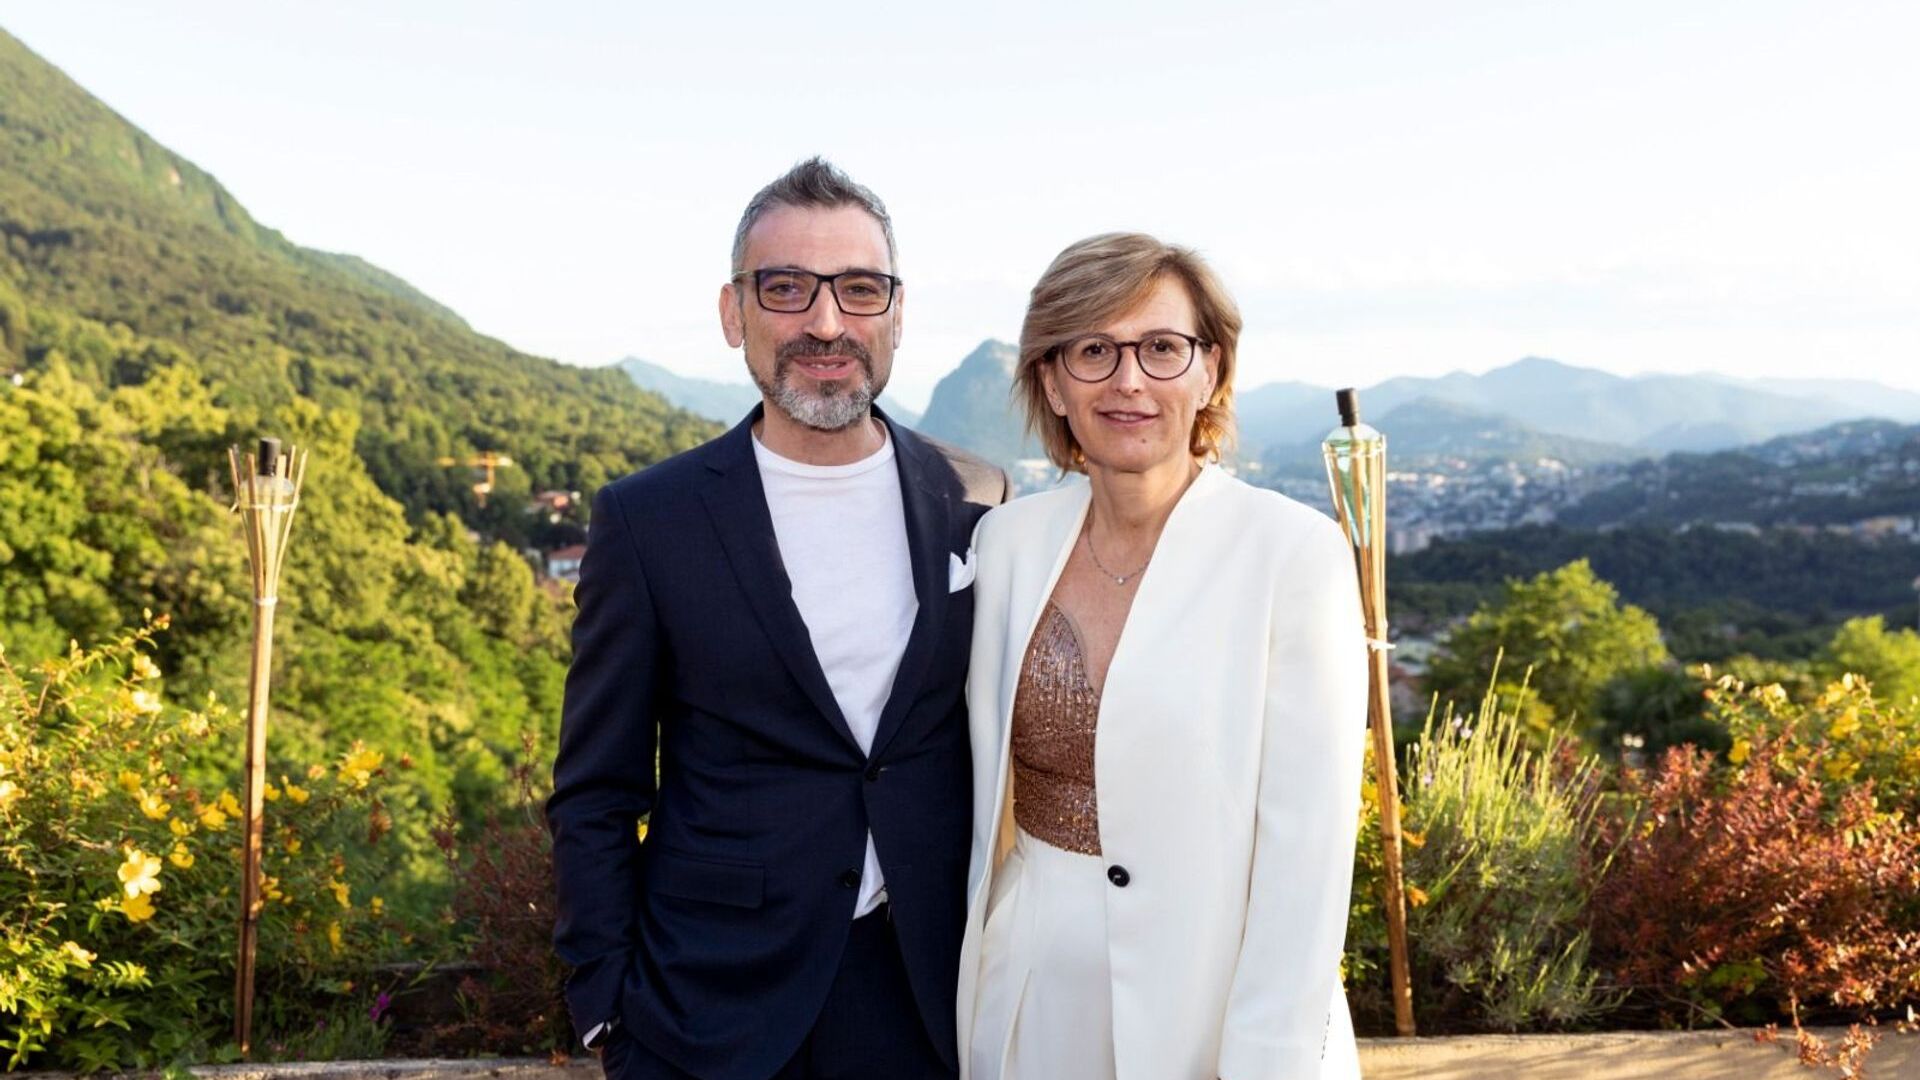 Cristina Giotto, President, and Luca Mauriello, Vice President, embody the new top management of ated-ICT Ticino